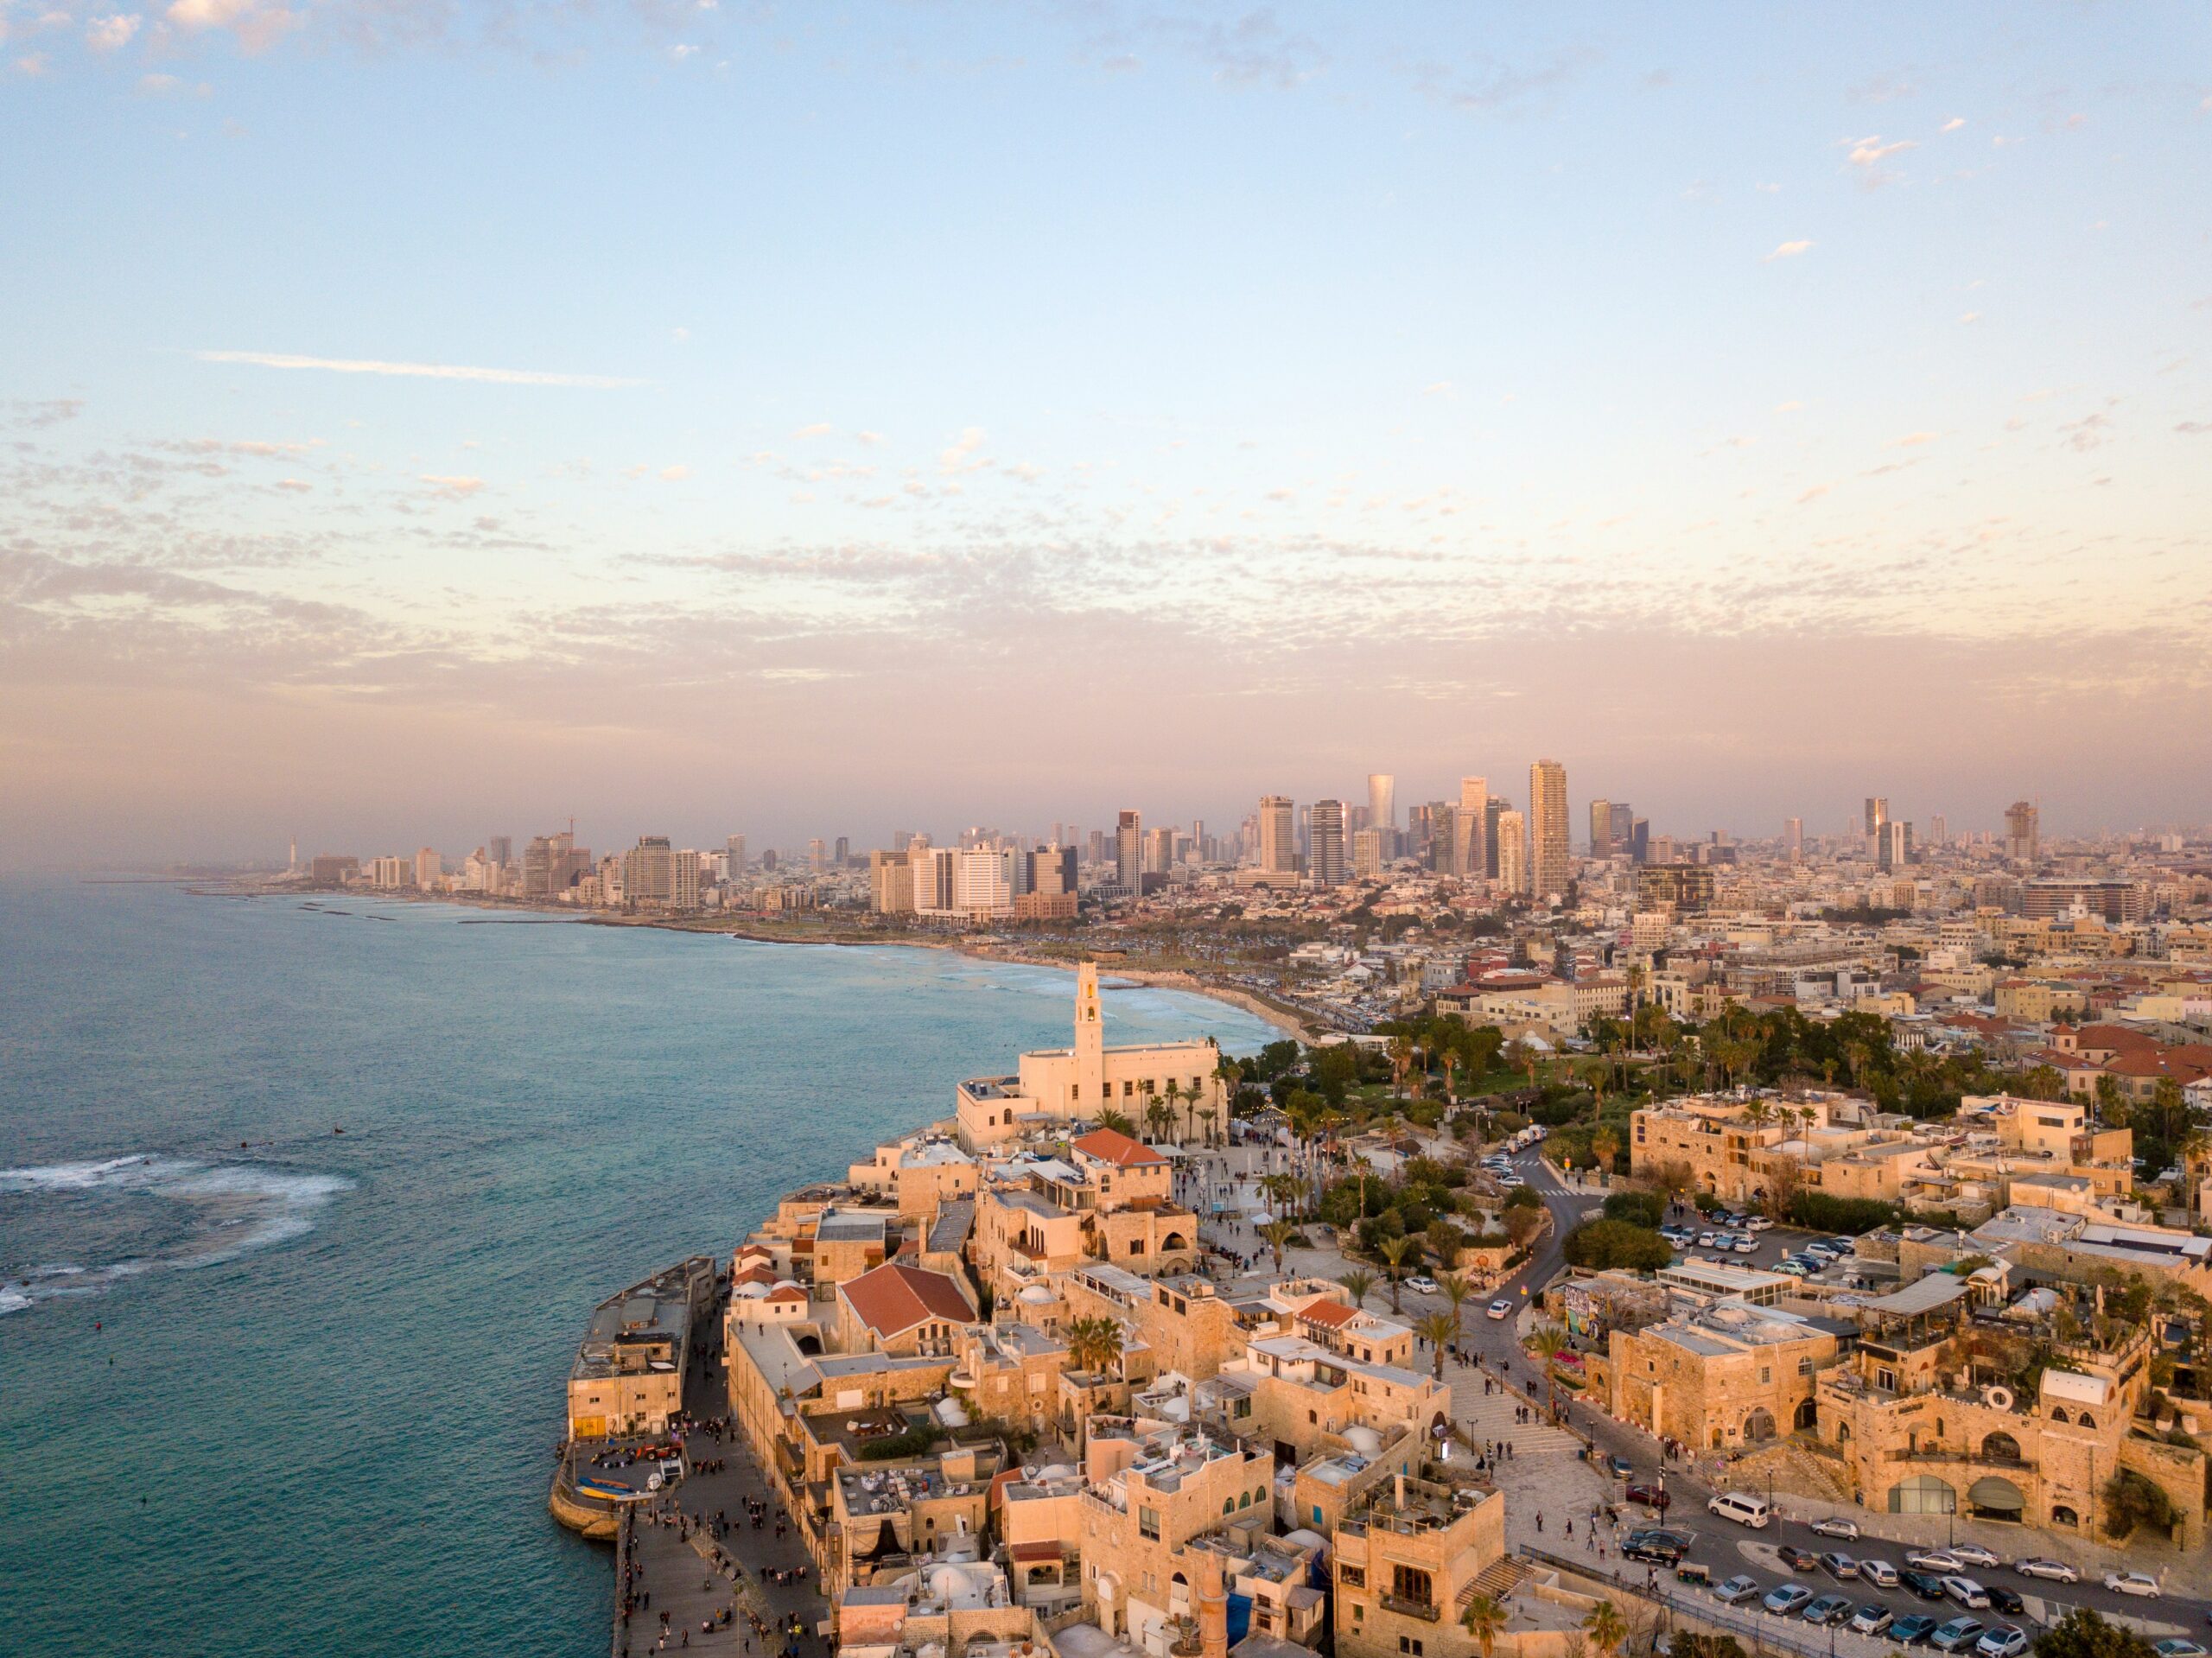 Learn more about the escalating situation between Israel and Iran. Pictured: a view of Israel’s coast near sunset